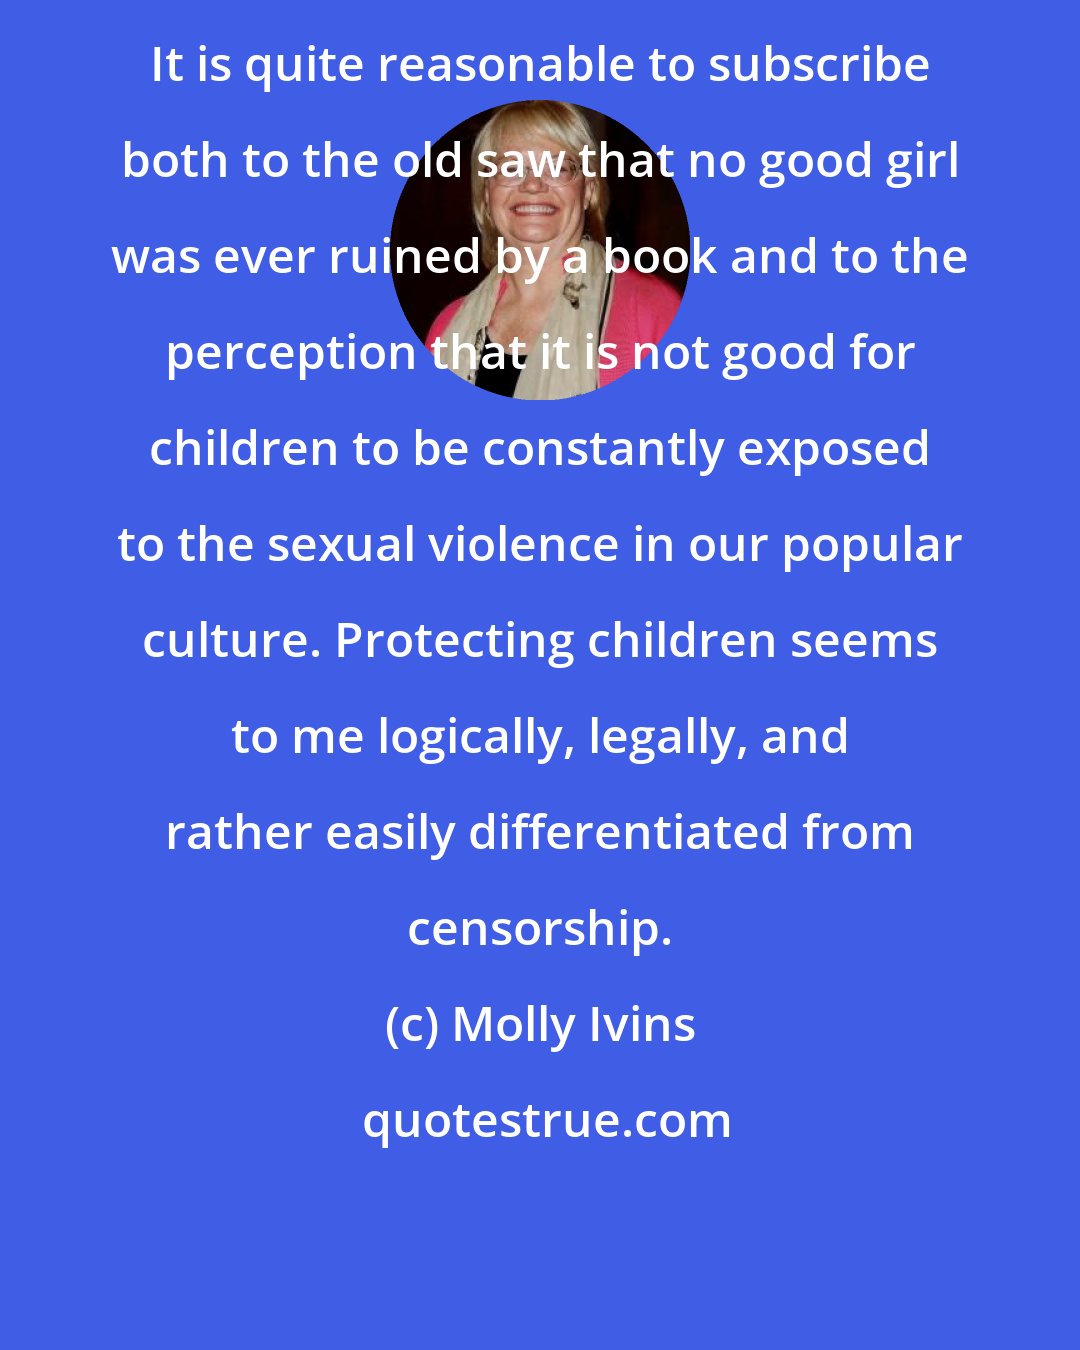 Molly Ivins: It is quite reasonable to subscribe both to the old saw that no good girl was ever ruined by a book and to the perception that it is not good for children to be constantly exposed to the sexual violence in our popular culture. Protecting children seems to me logically, legally, and rather easily differentiated from censorship.